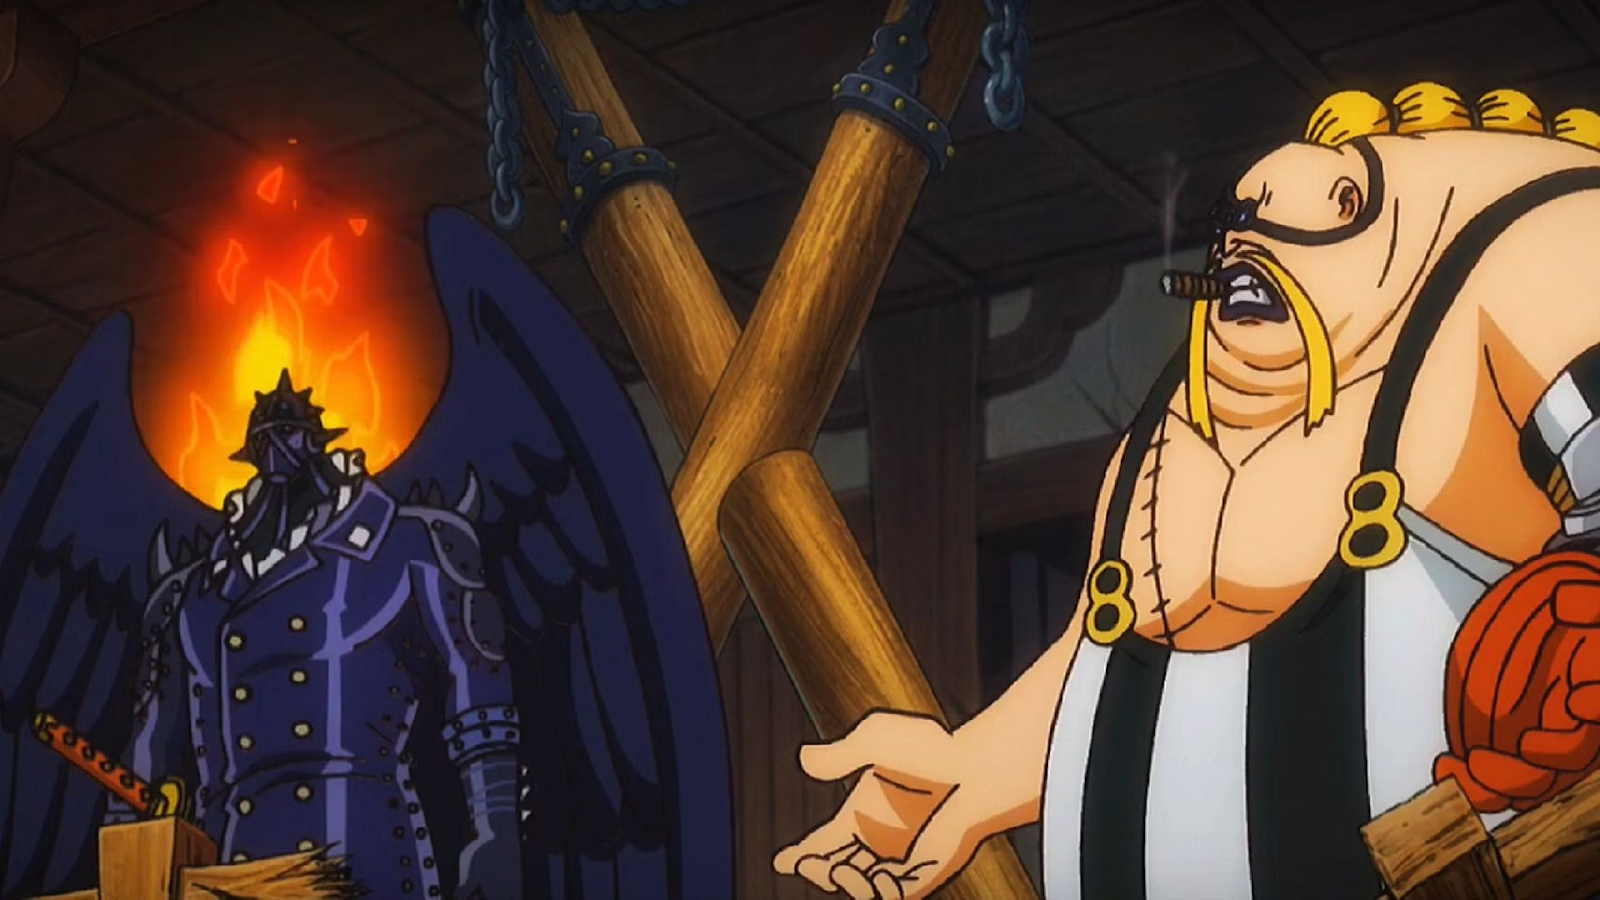 King The Wildfire  One piece ep, One piece anime, The 3 kings